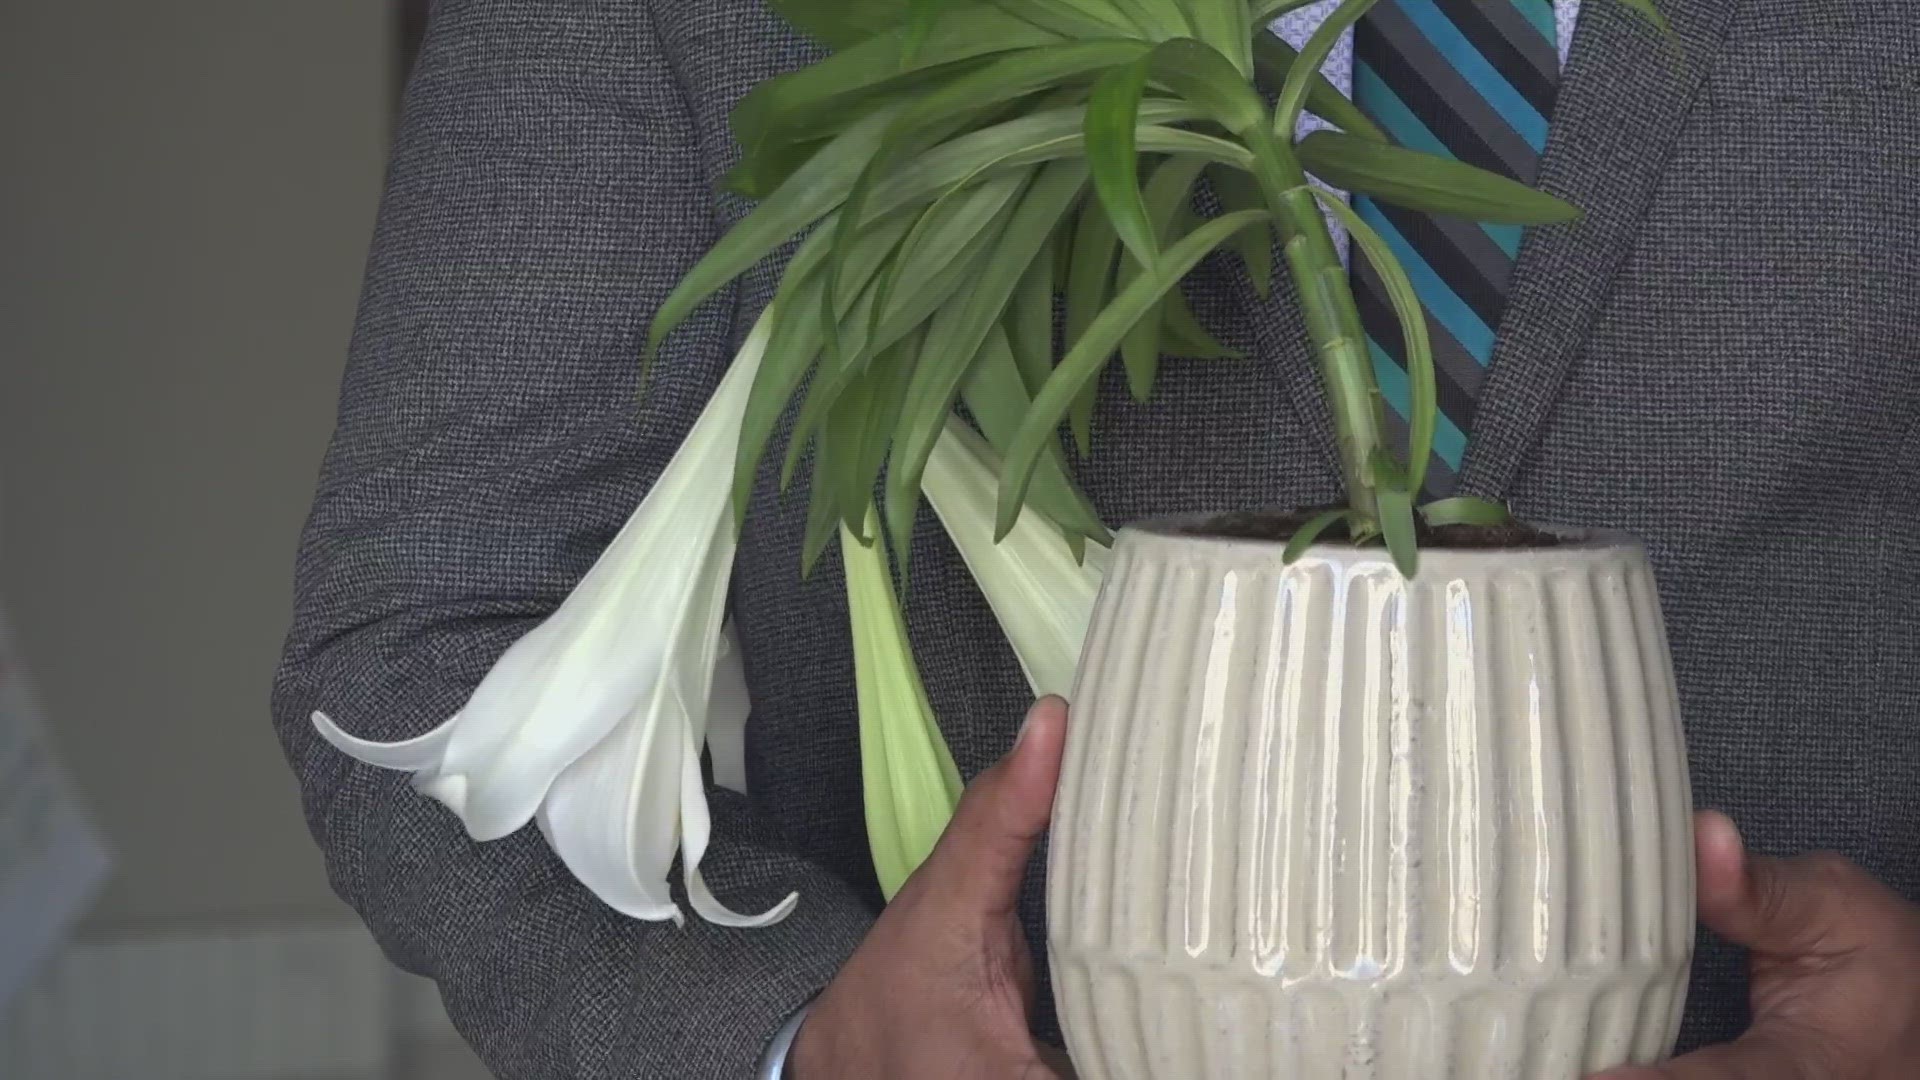 Peace lilies were handed out by members of the SF Zion Church a week after a shooting hurt two at a Sikh temple in Sacramento.